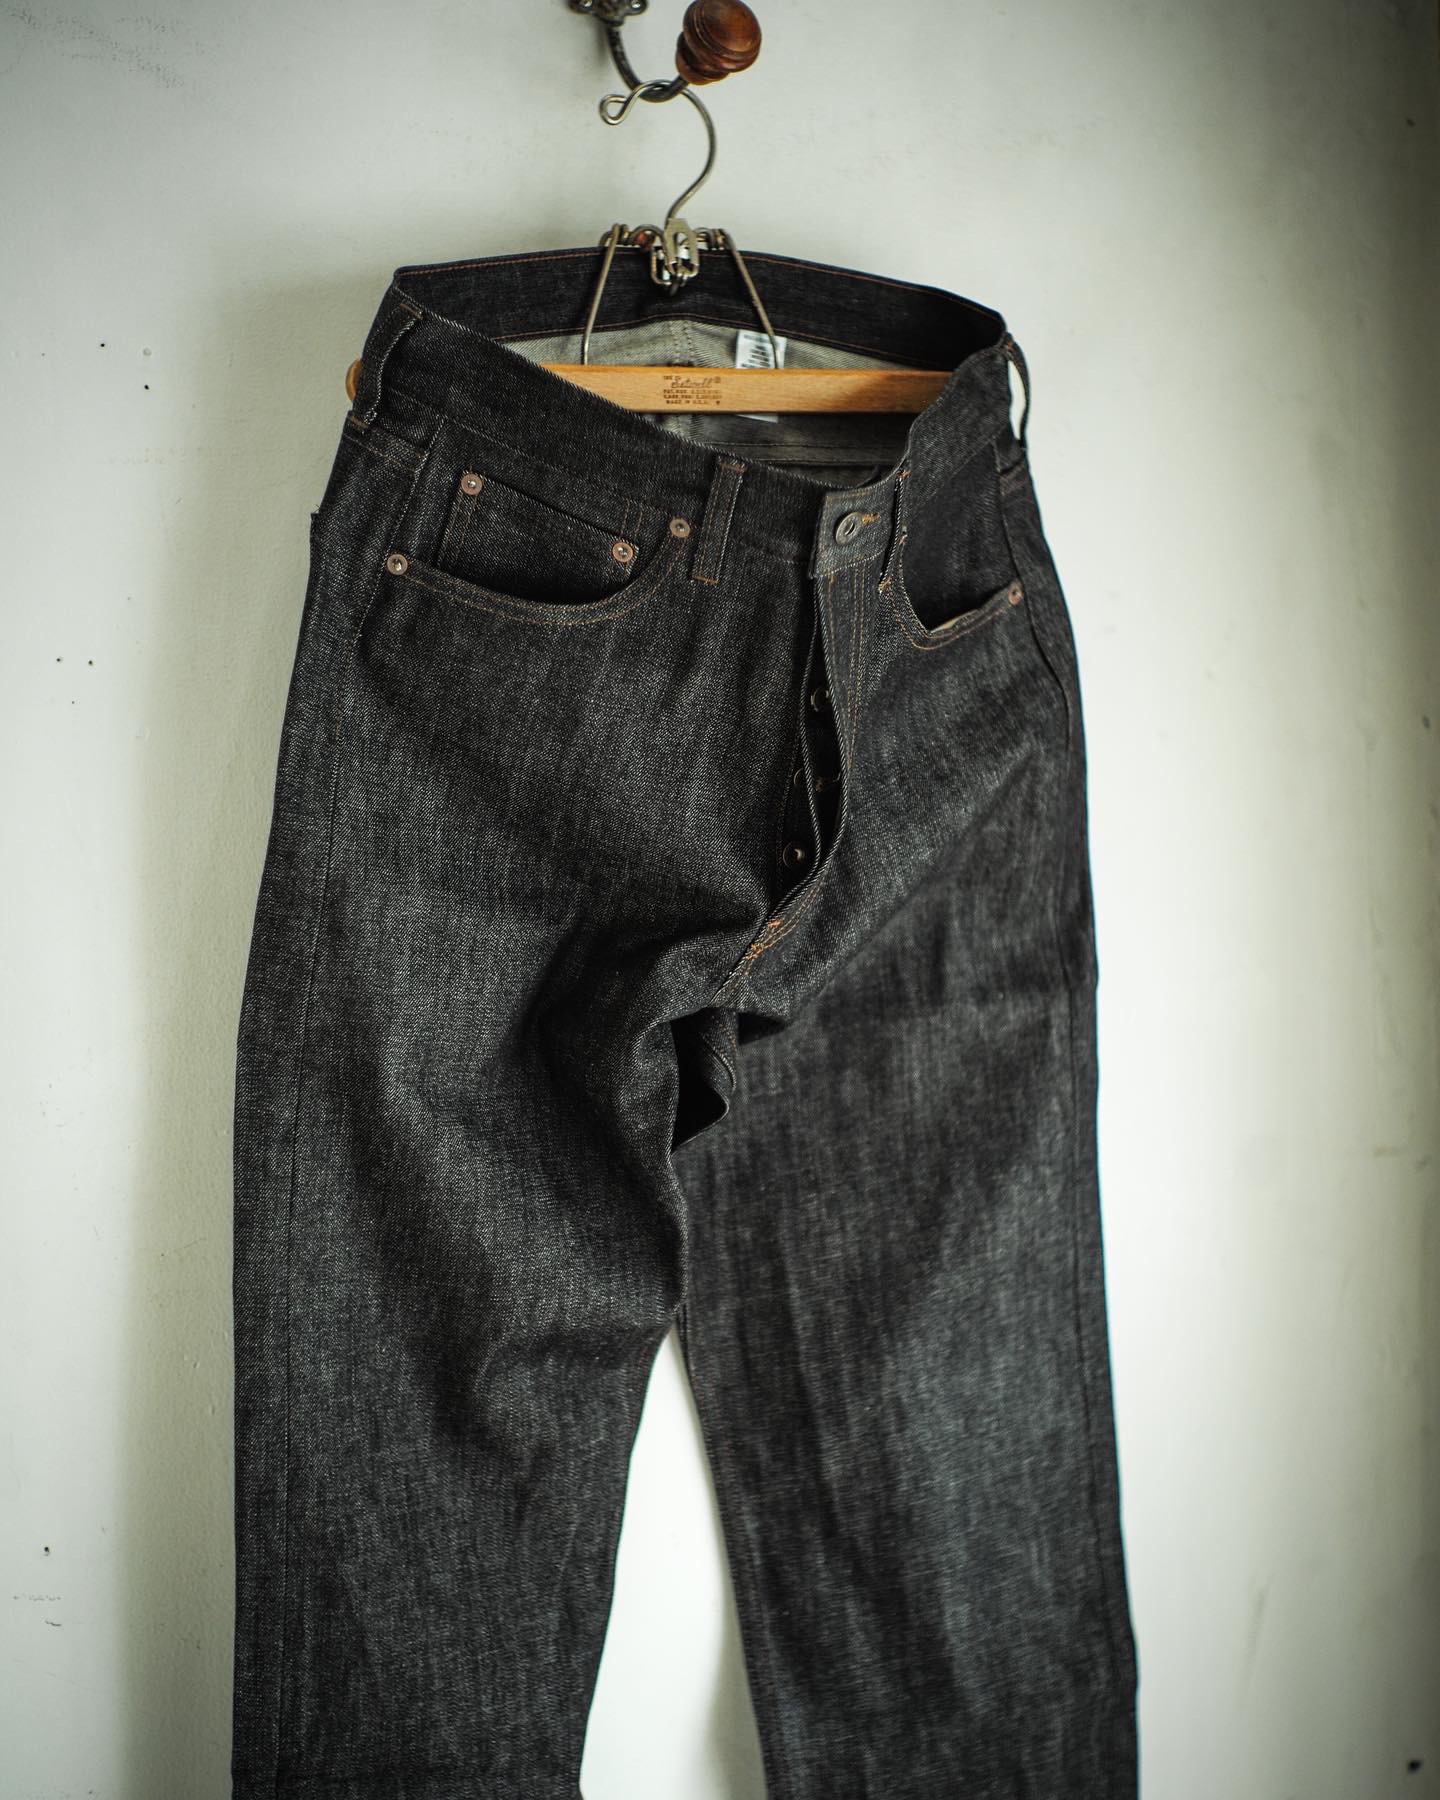 MSG&SONS BLACK JEANS MADE IN USA | ARCH アーチ - Sapporo / Tokyo